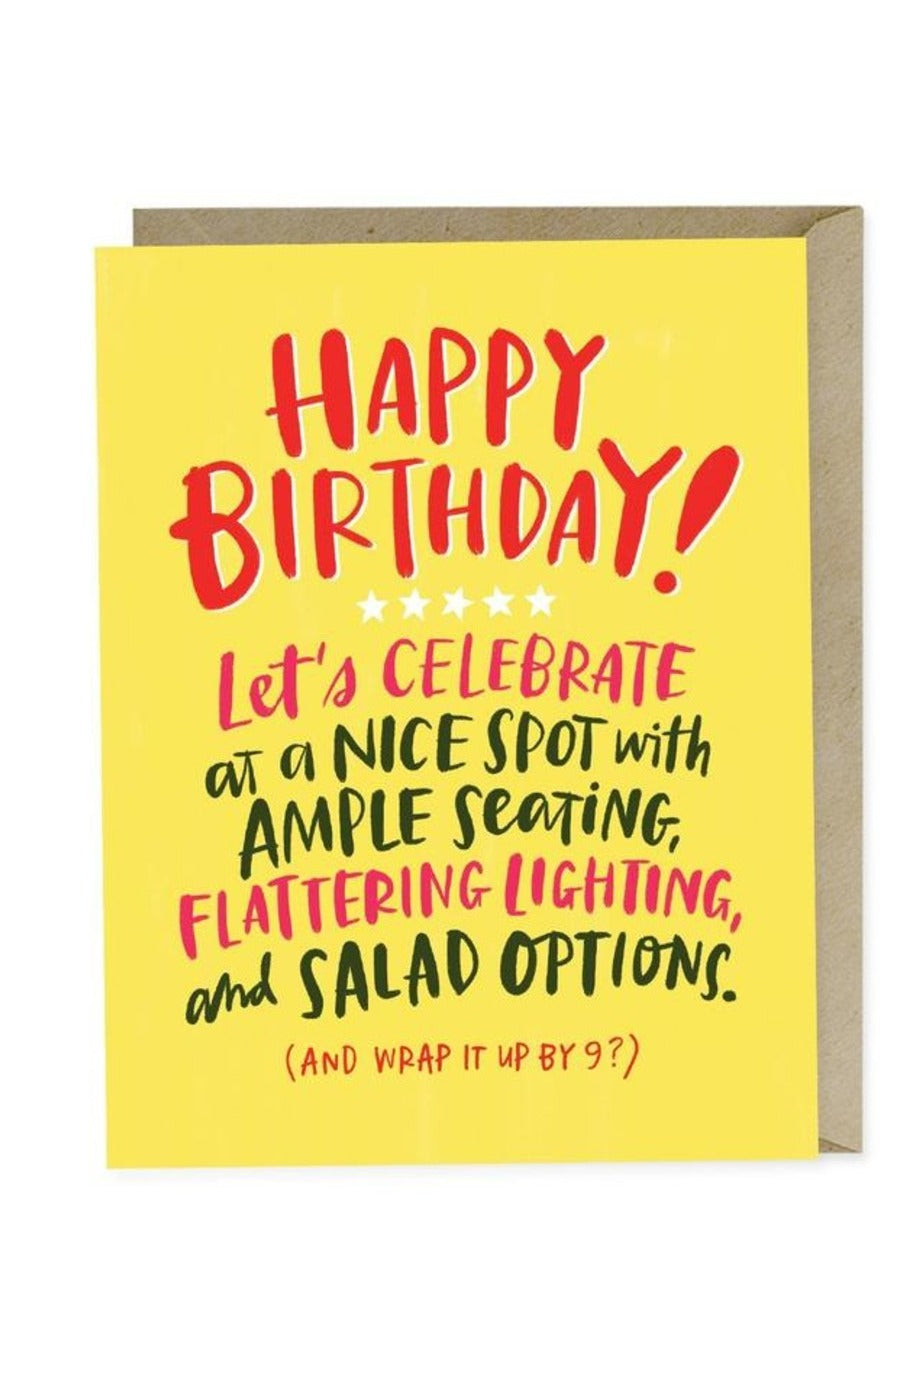 Ample Seating Birthday Card